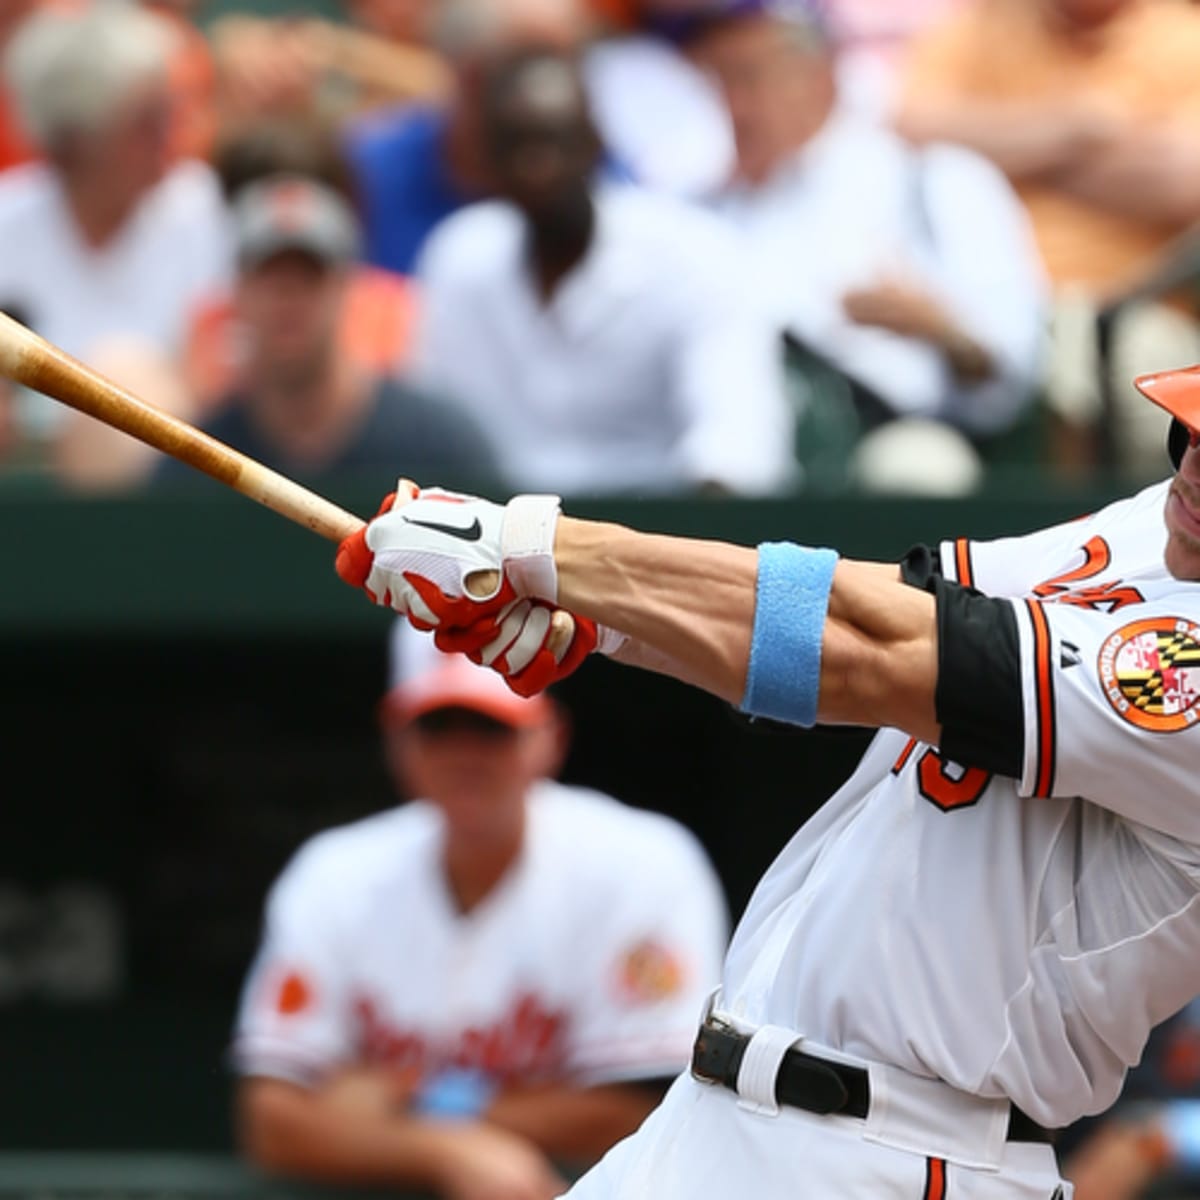 Should The Orioles Give Matt Wieters A Qualifying Offer? - MLB